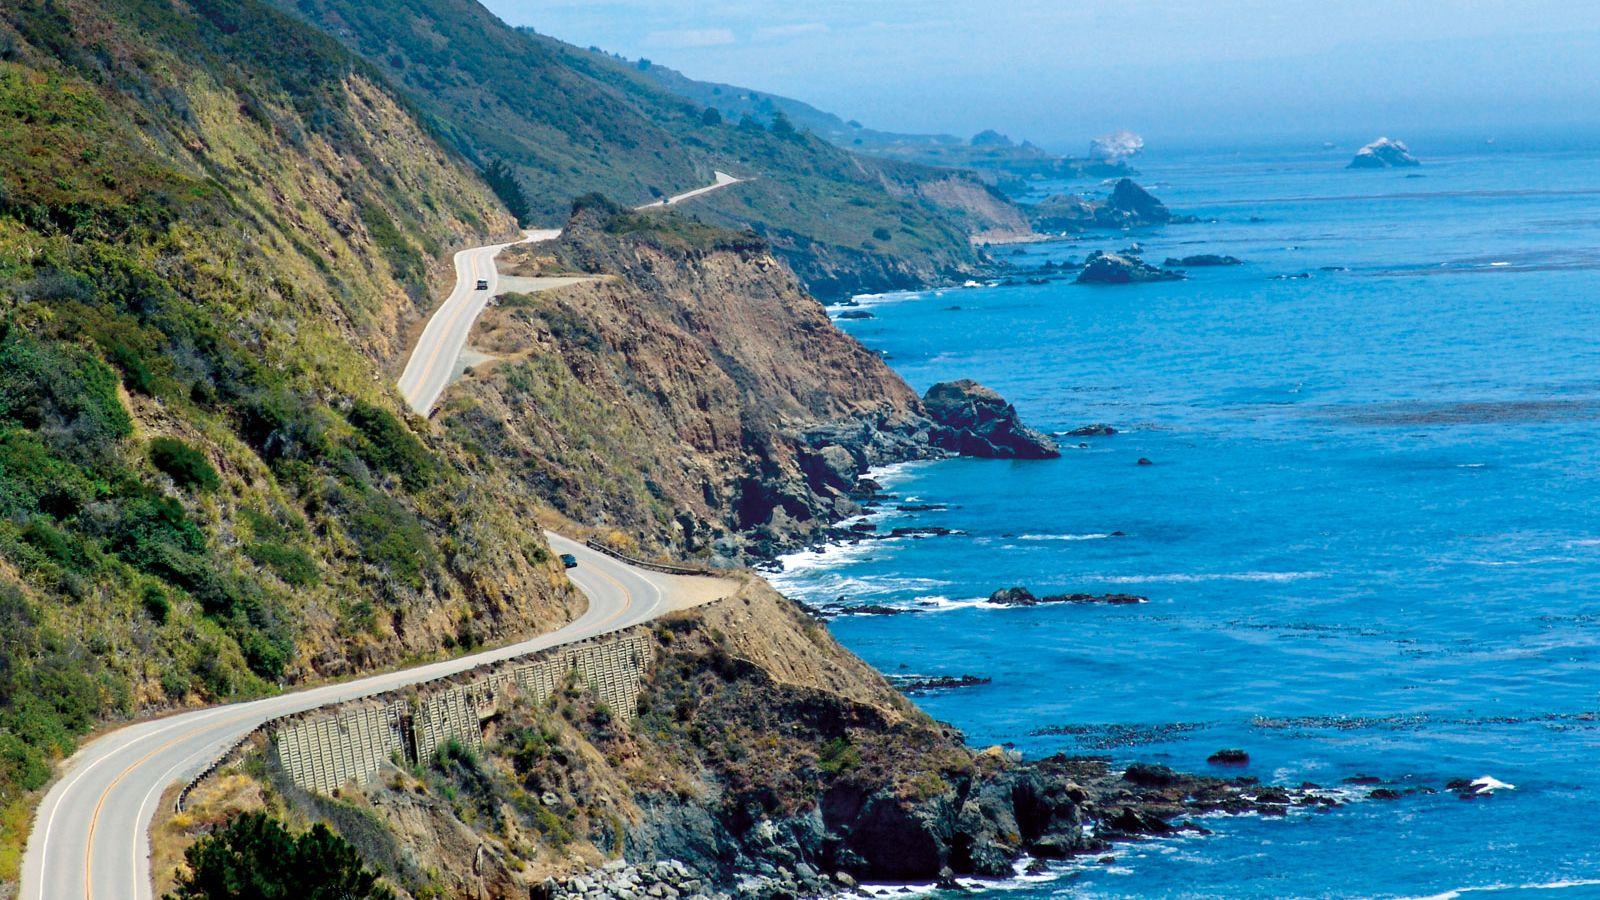 best retirement road trips in the US,best retirement road trips,best retirement road trip ideas,best scenic road trips in USA,bucket list trips that are perfect for retirement travel,most popular road trip routes,retired and travelling,retired road trip,retirement adventures,retirement road trip ideas,retirement road trips,retirement travel ideas,retirement trips,road trips for retirees,road trips for seniors,road trip with senior citizens,best road trips in the USA,road trip guides,overland routes,best road trip ideas US,road trip north USA,best road trips from Los Angeles,epic road trips in the US,ideas for an incredible American road trip,north USA road trip,planning the great American road trip,road trip ideas in the US,road trip to north west USA,best road trips,road trips in the US,best road trips in US,best road trips USA,best US road trips,best road trips in America,best driving road trips in America,best road trips America,best road trips for retirees in the US,best road trips in USA,best US road trips for seniors,cross country road trip route,most popular road trip destinations,most popular road trips in the US,the great American road trip,top road trips in the US,travel retirement ideas,ultimate US road trip,most scenic road trips in the US,retirement road trips in the US,retirement travel in USA,road trip destinations in the USA,trips to take in the US,best way to travel the US in retirement